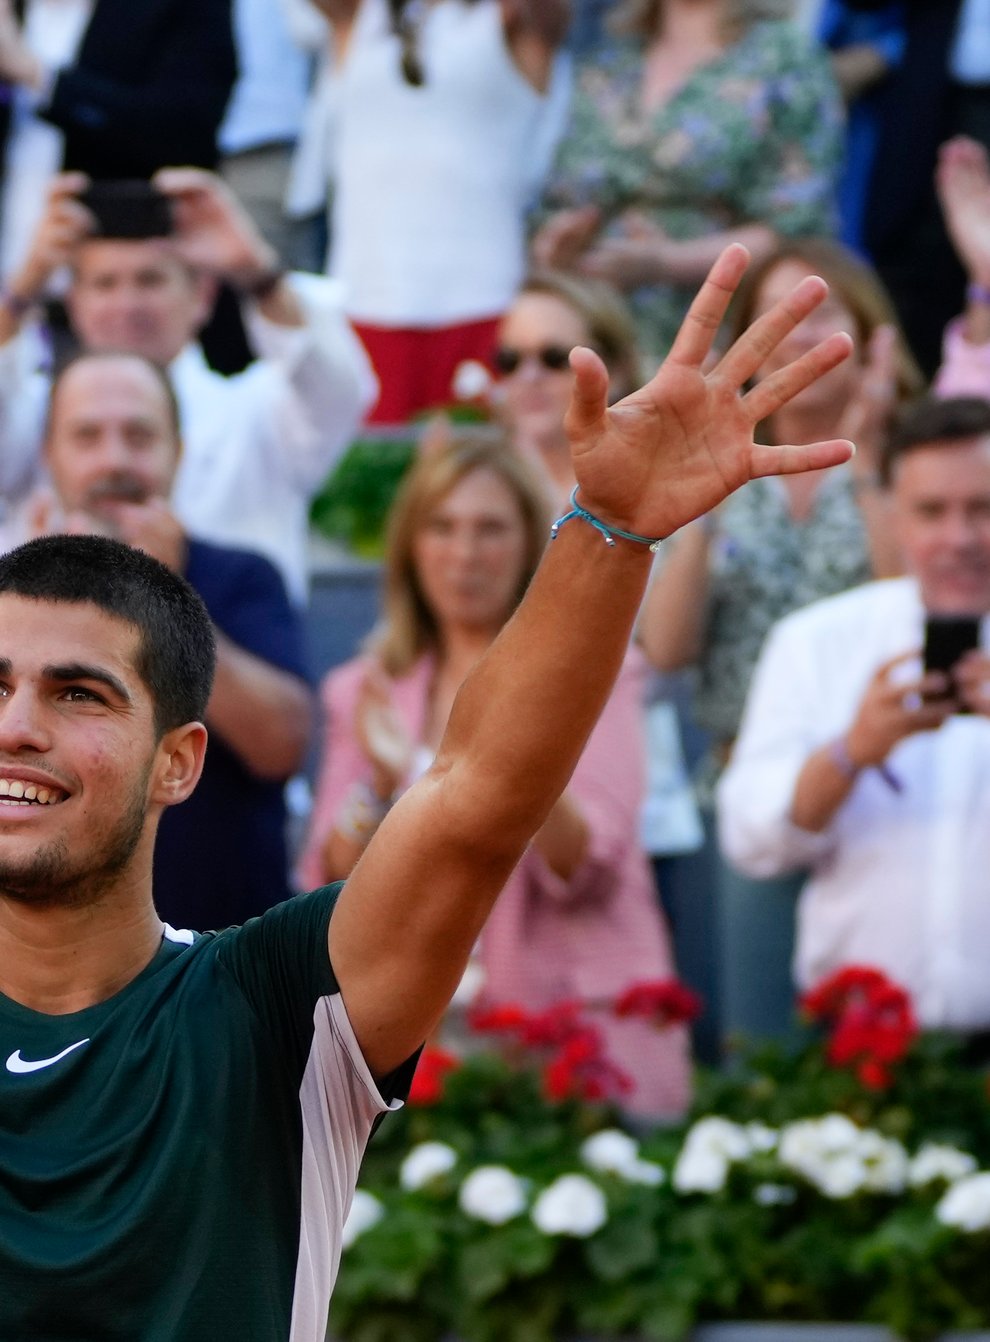 Carlos Alcaraz celebrates after defeating Alexander Zverev in the Madrid Open final (Paul White/AP)